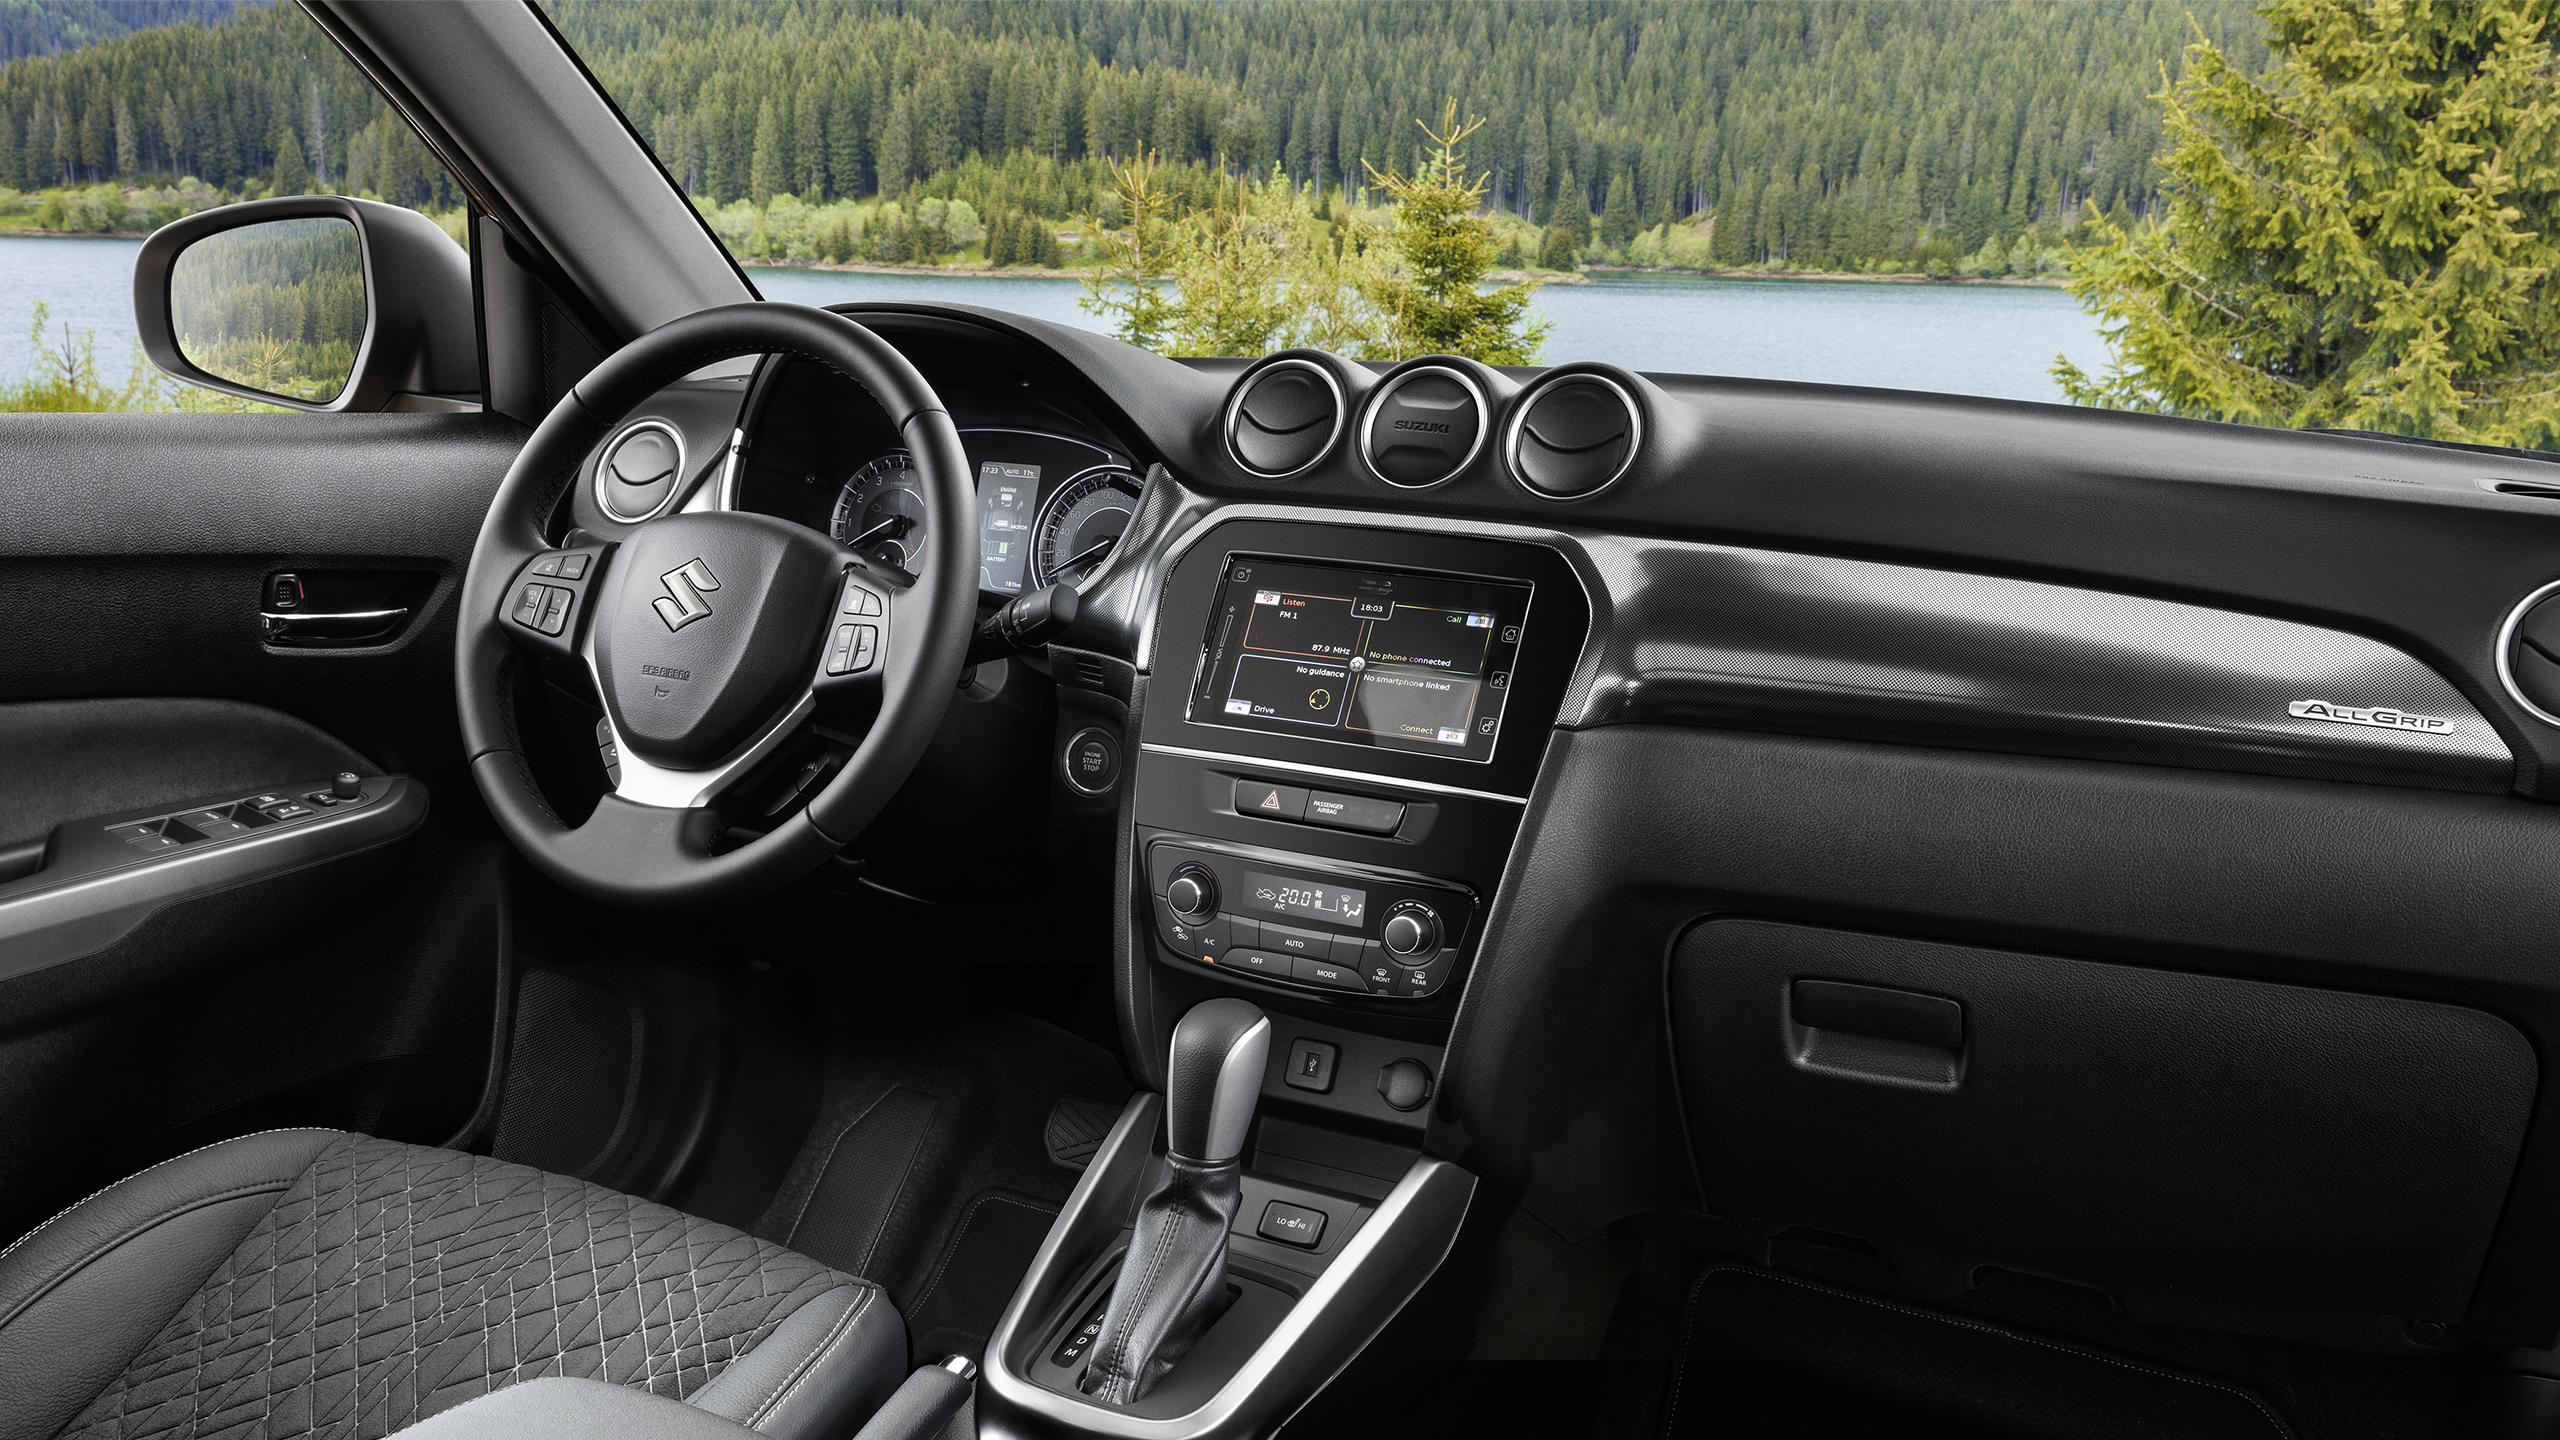 VITARA-interior-lake-view-from-front-and-side-windows